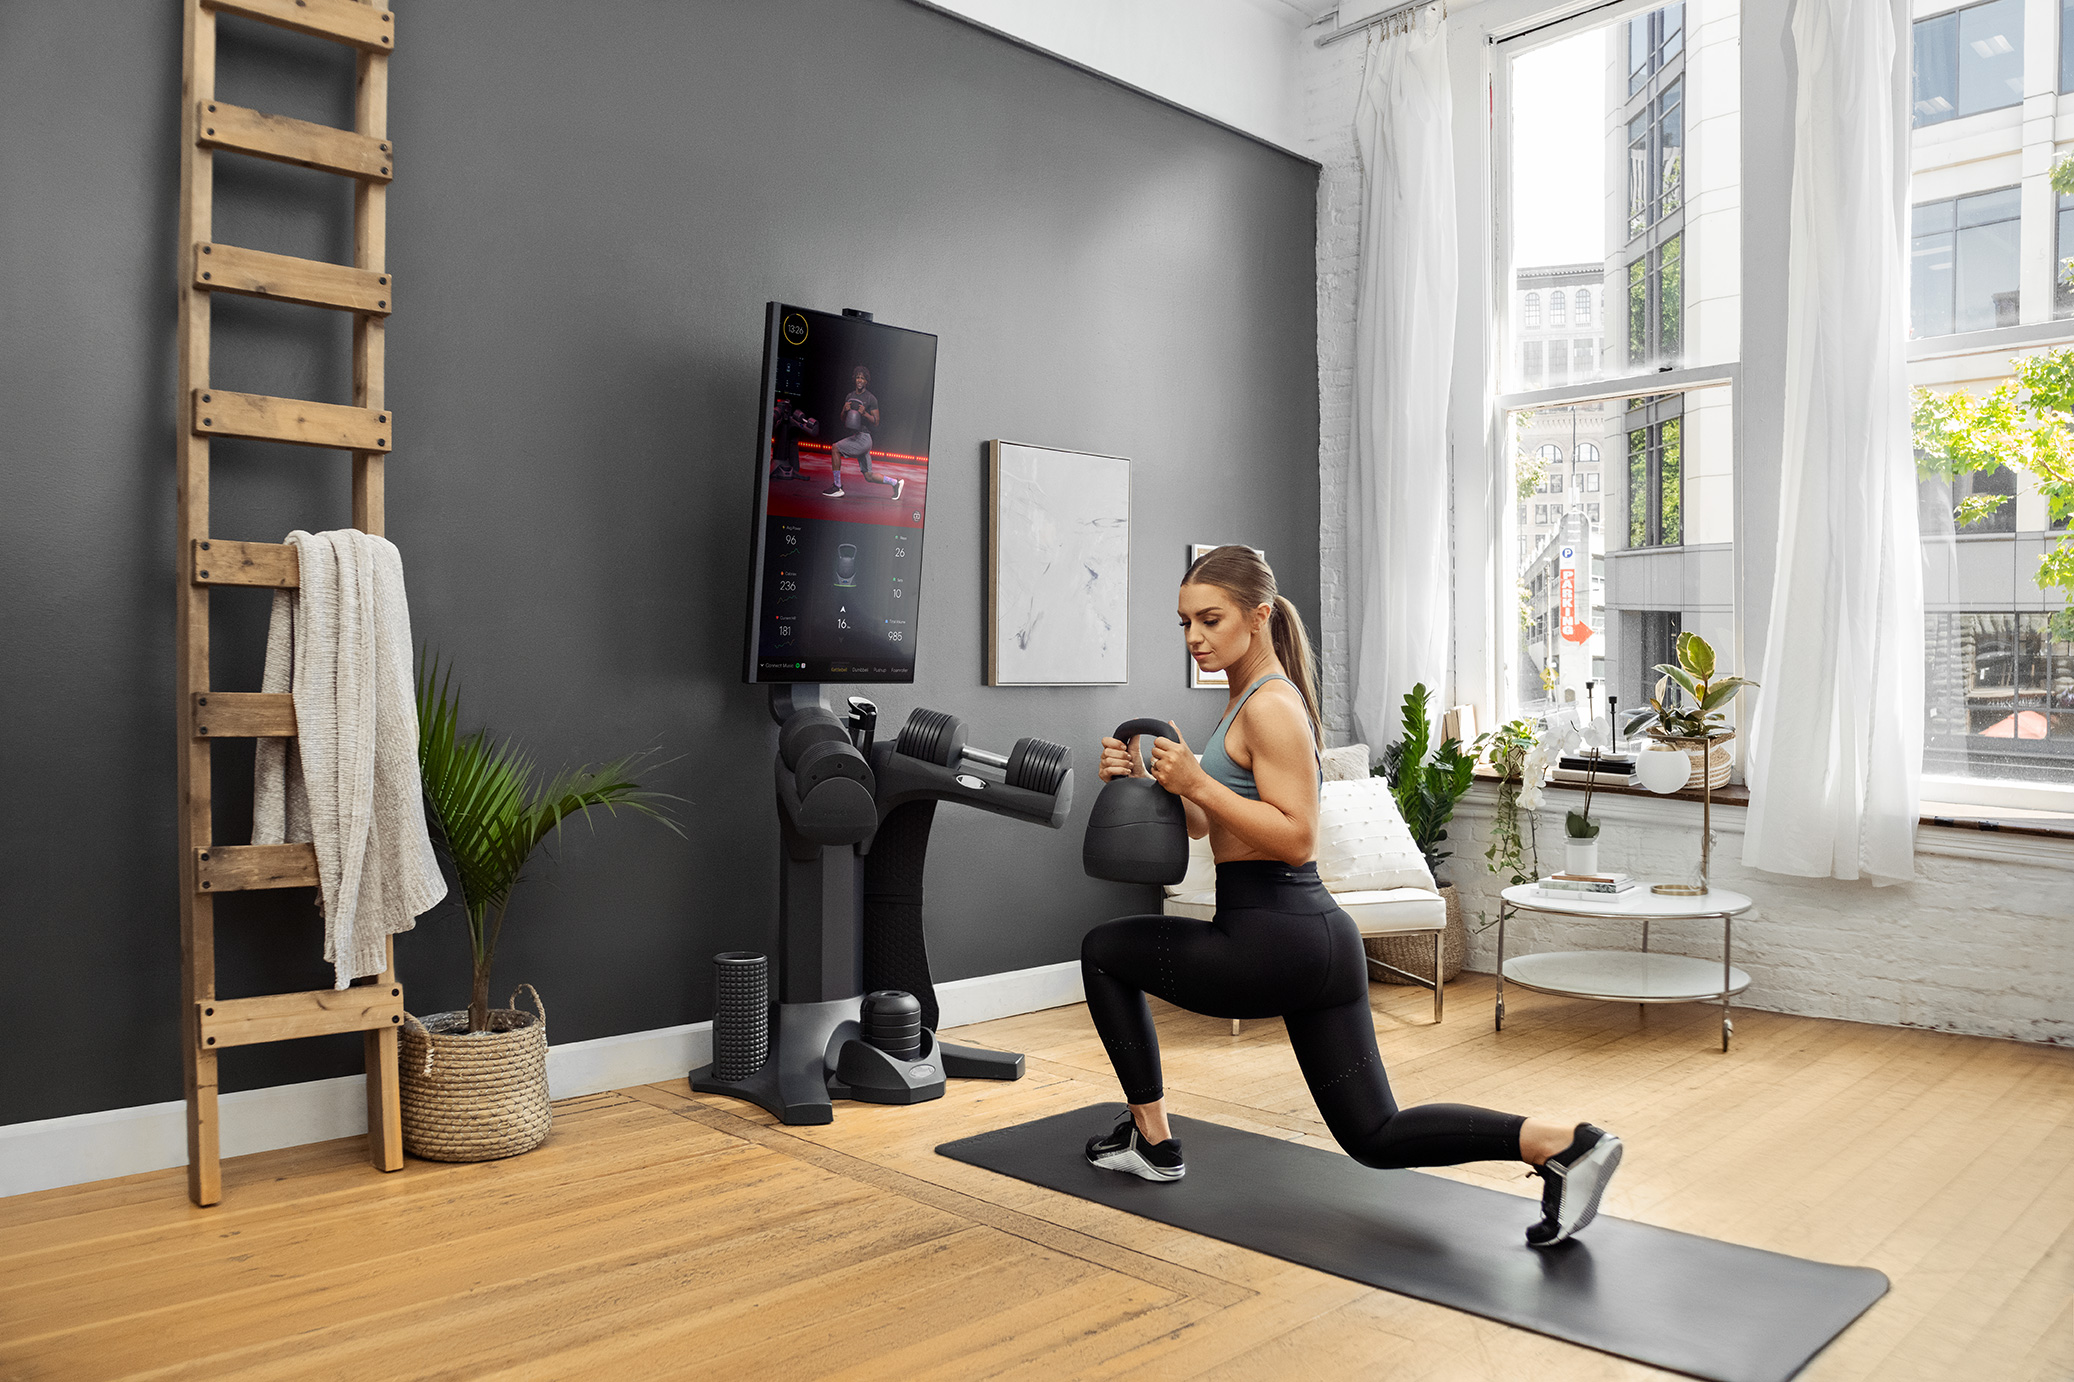 Use These Smart Home Gym Equipment To Get You Fit In 2021